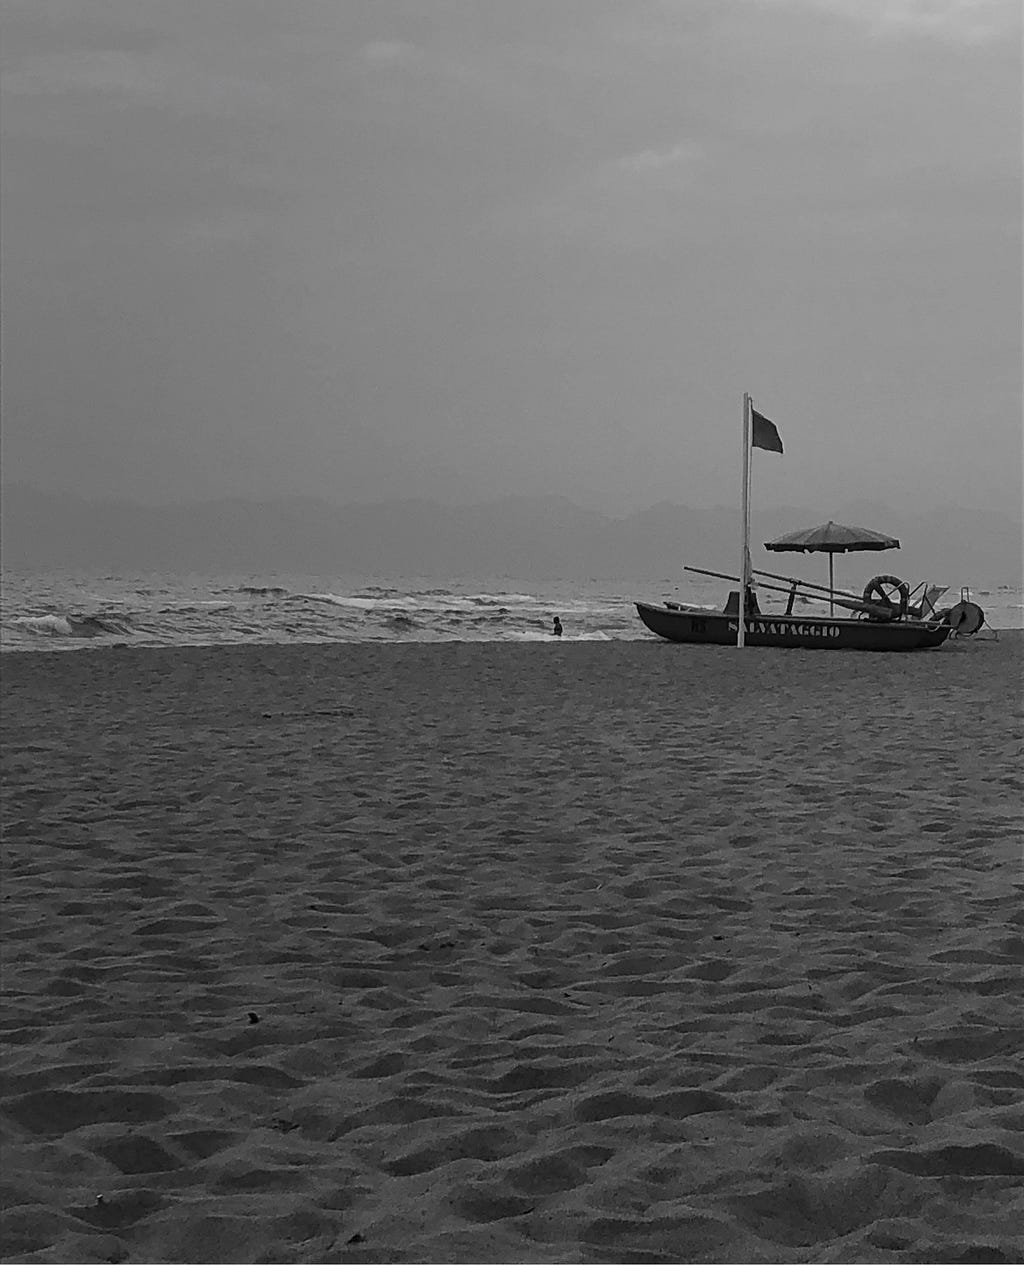 A black and white picture of a beach. No people can be seen, just a hissed flag and a safe boat reading ‘Salvataggio’.